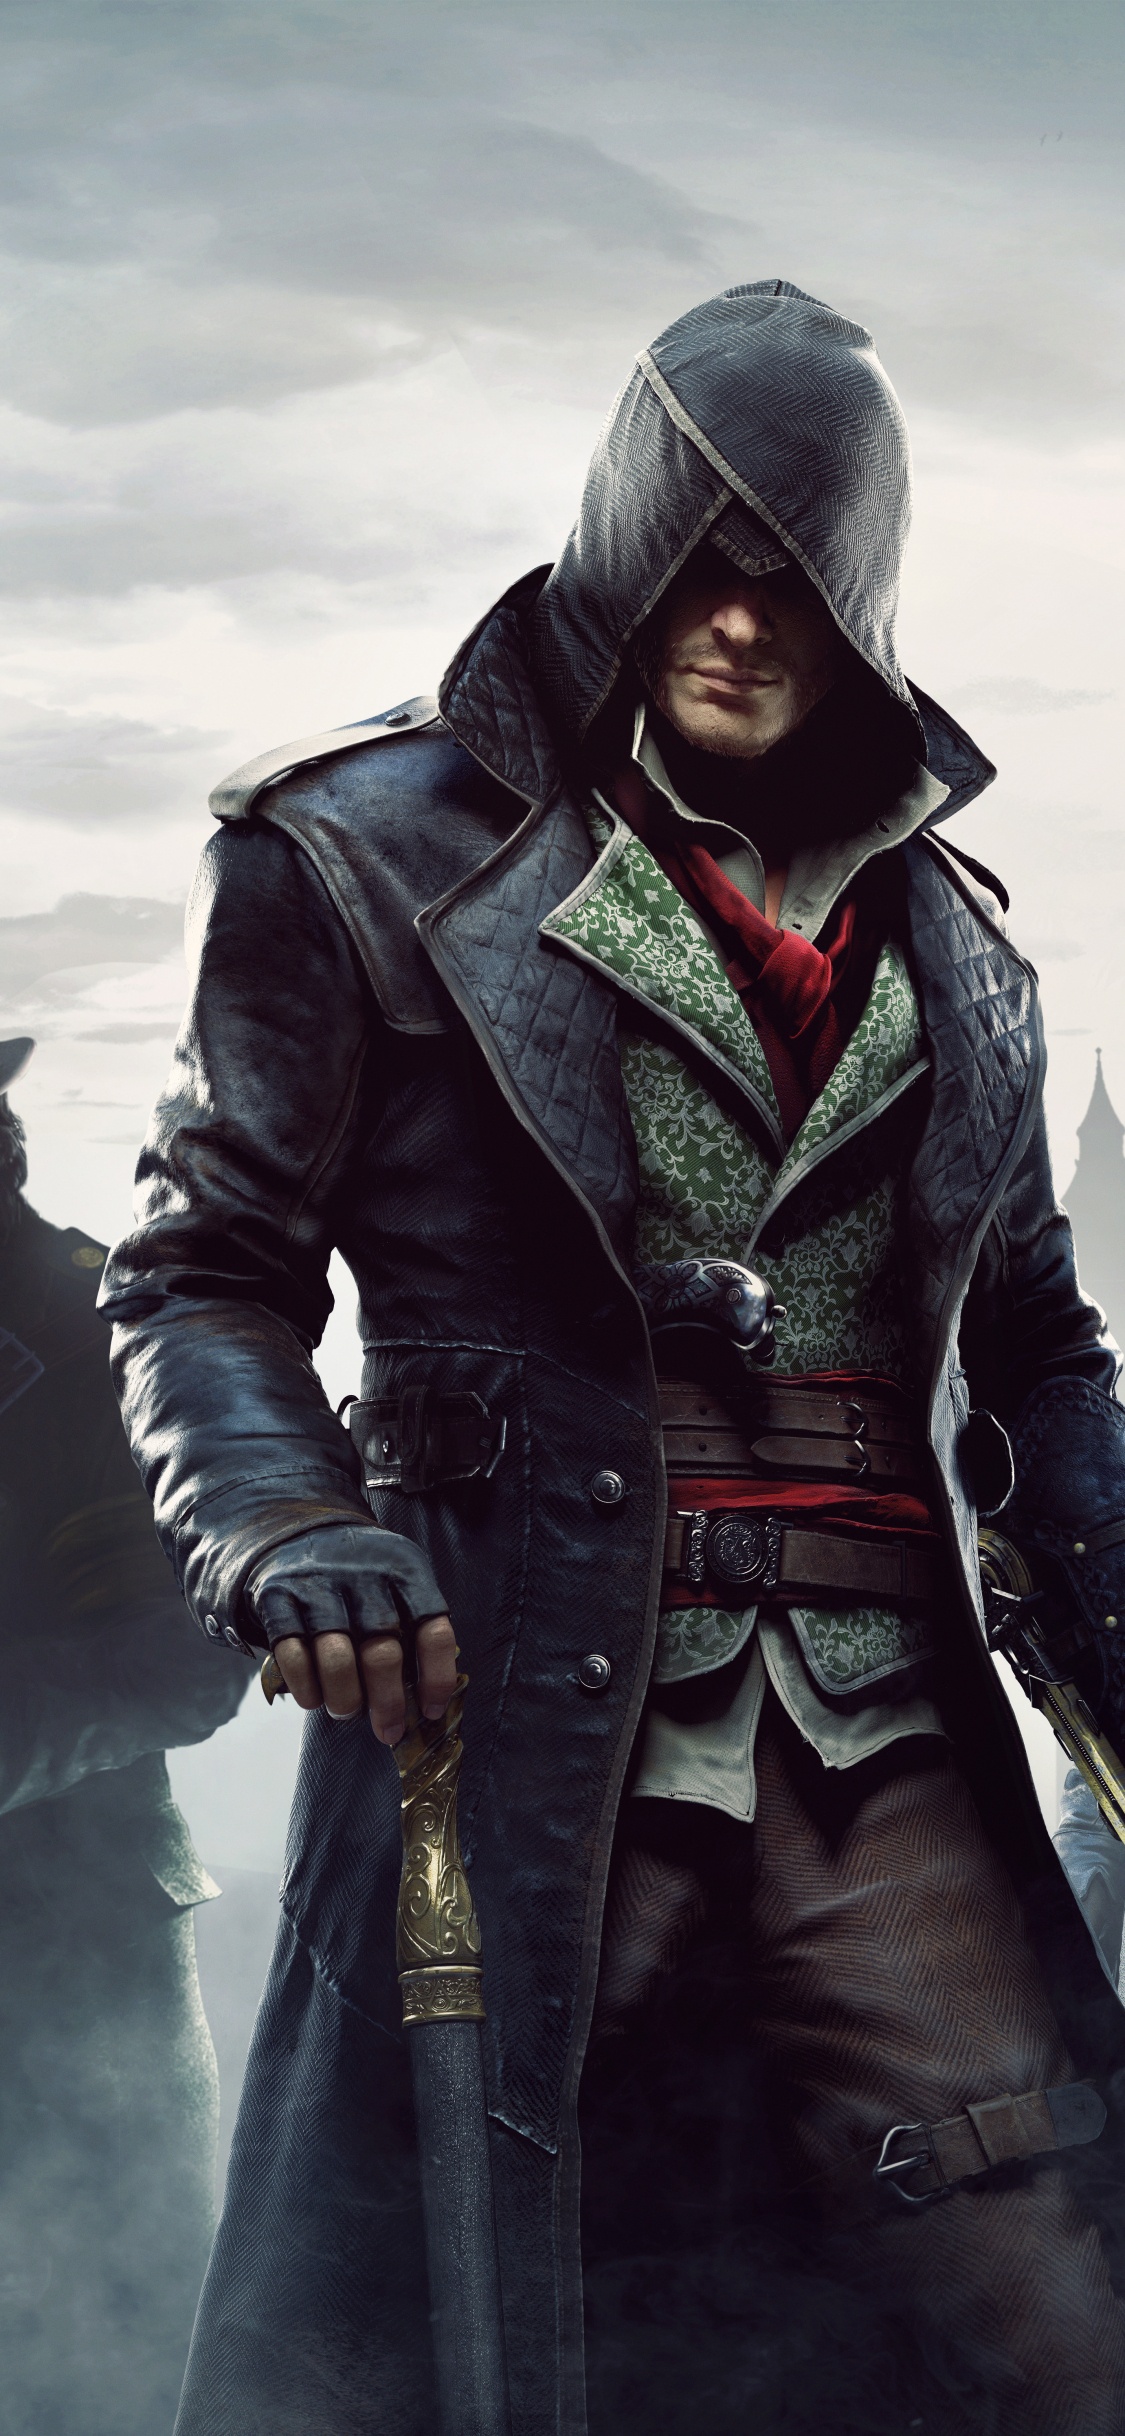 Assassins Creed Syndicate, Ubisoft, pc Game, Film, Assassins Creed Unity. Wallpaper in 1125x2436 Resolution